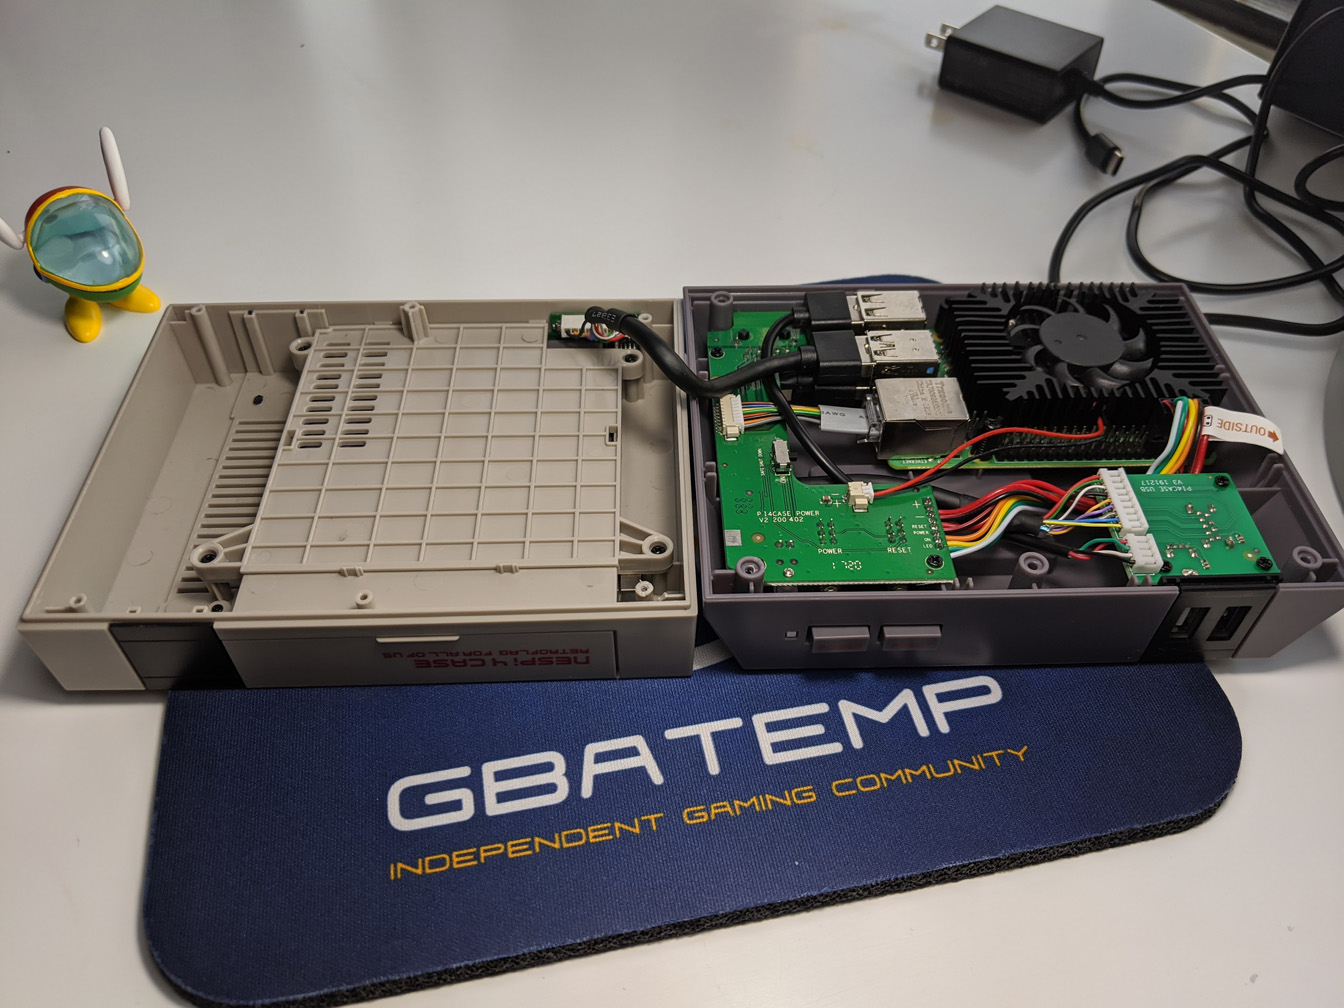 Retroflag NESPi 4 (Raspberry Pi 4 case) Review (Hardware) - Official  GBAtemp Review | GBAtemp.net - The Independent Video Game Community